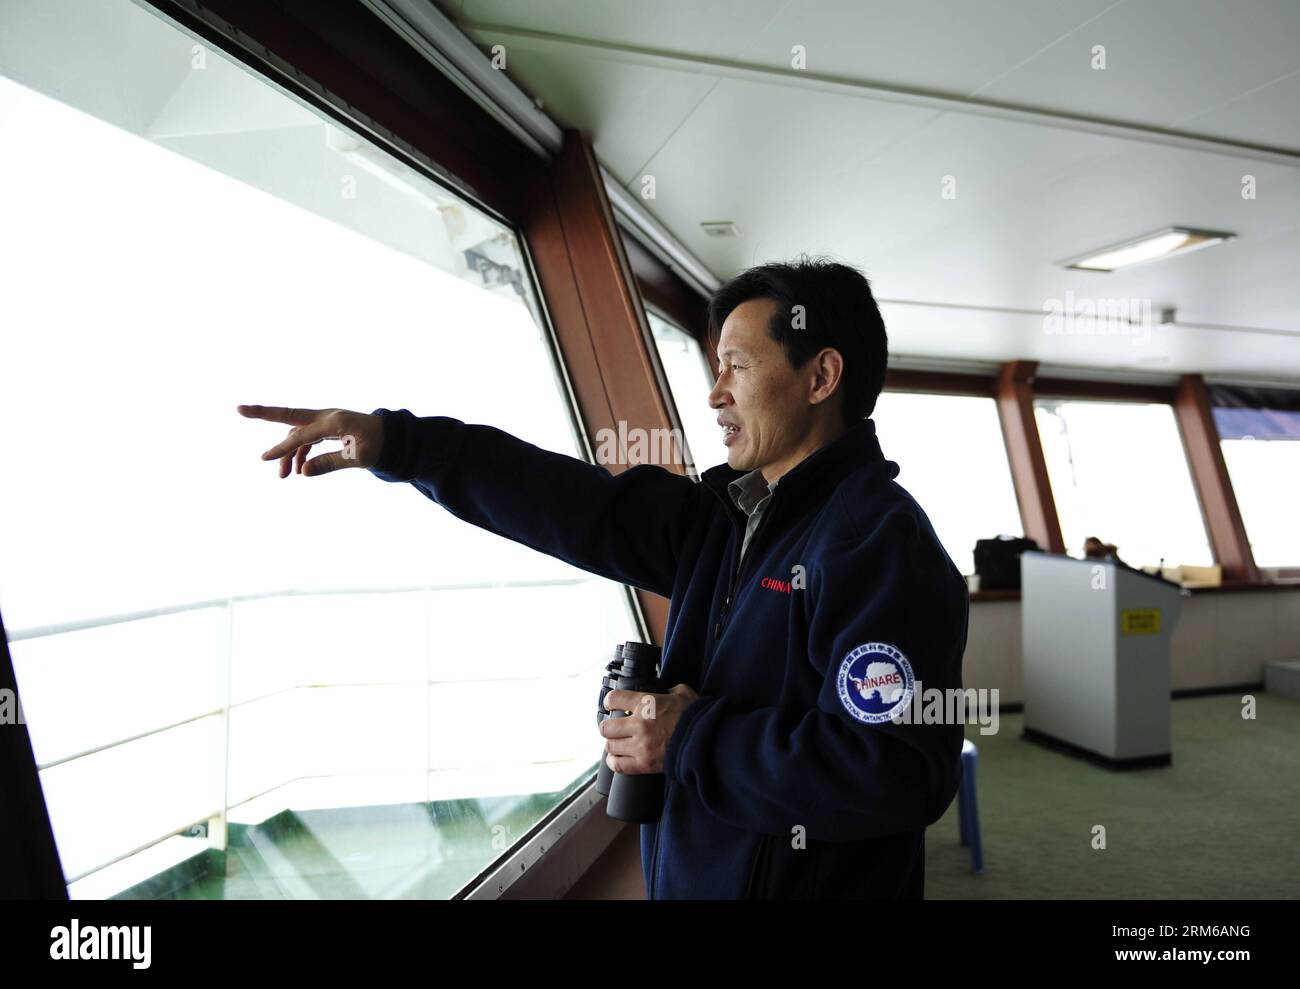 (131228) -- ABOARD XUELONG, Dec. 28, 2013 (Xinhua) -- Wang Jianzhong, captain of Xuelong, observes the weather condition on Chinese icebreaker Xuelong, or Snow Dragon, Dec. 28, 2013. Chinese icebreaker Xuelong, or Snow Dragon, on way to rescue a Russian science ship trapped off Antarctica, has stalled itself since midnight Friday after getting stuck in thick ice only 6.1 nautical miles away from the Russian ship. (Xinhua/Zhang Jiansong) (yxb) CHINA-30TH ANTARCTIC EXPEDITION-ICEBREAKER (CN) PUBLICATIONxNOTxINxCHN   Aboard XUELONG DEC 28 2013 XINHUA Wang Jianzhong Captain of XUELONG observes The Stock Photo